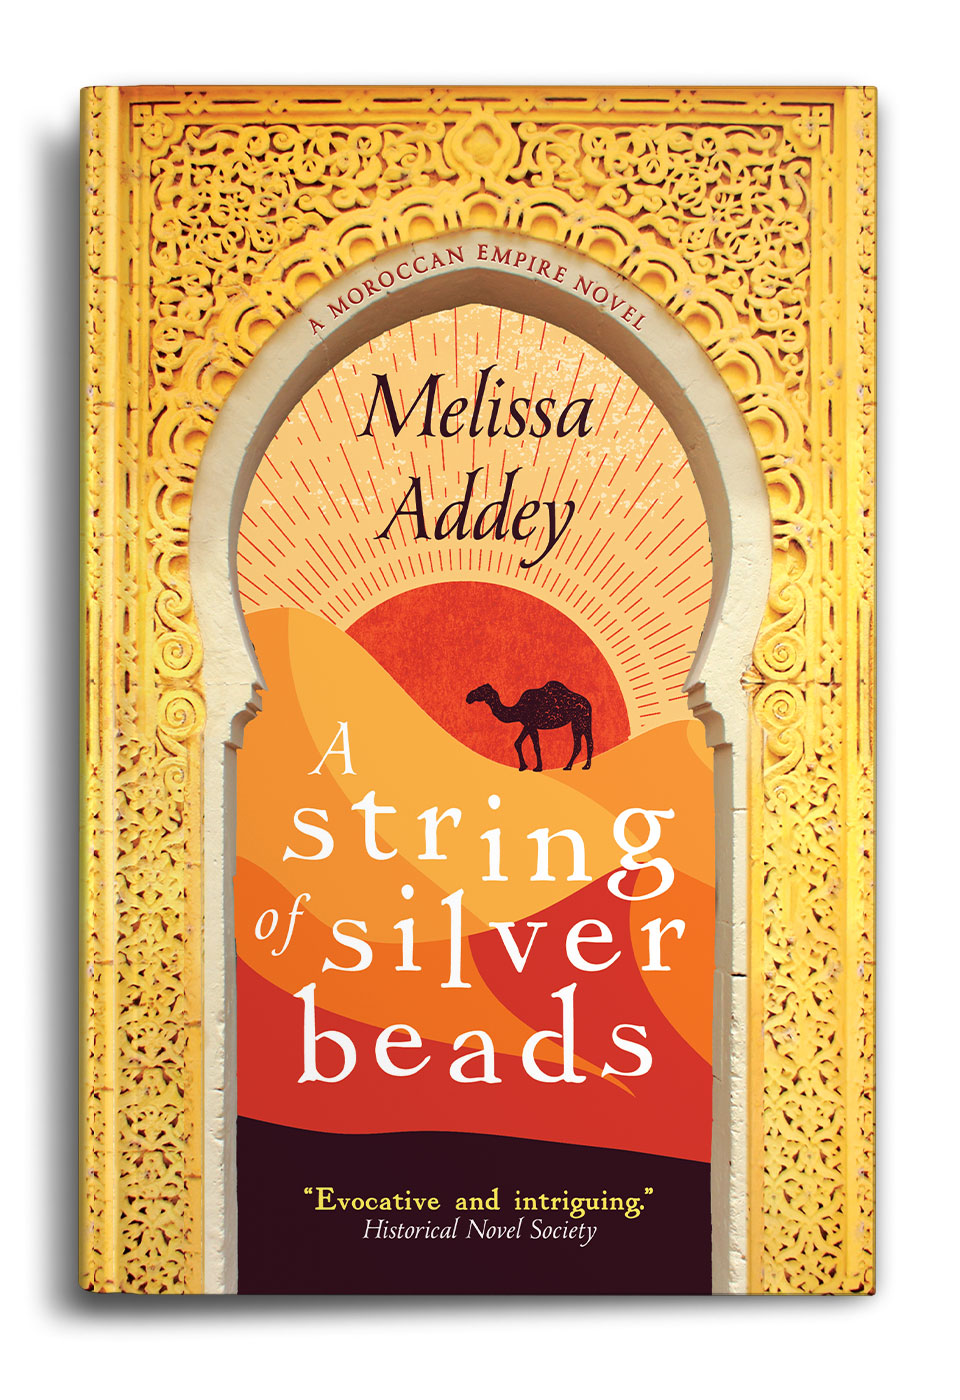 A-String-Of-Silver-Beads-By-Melissa-Addey